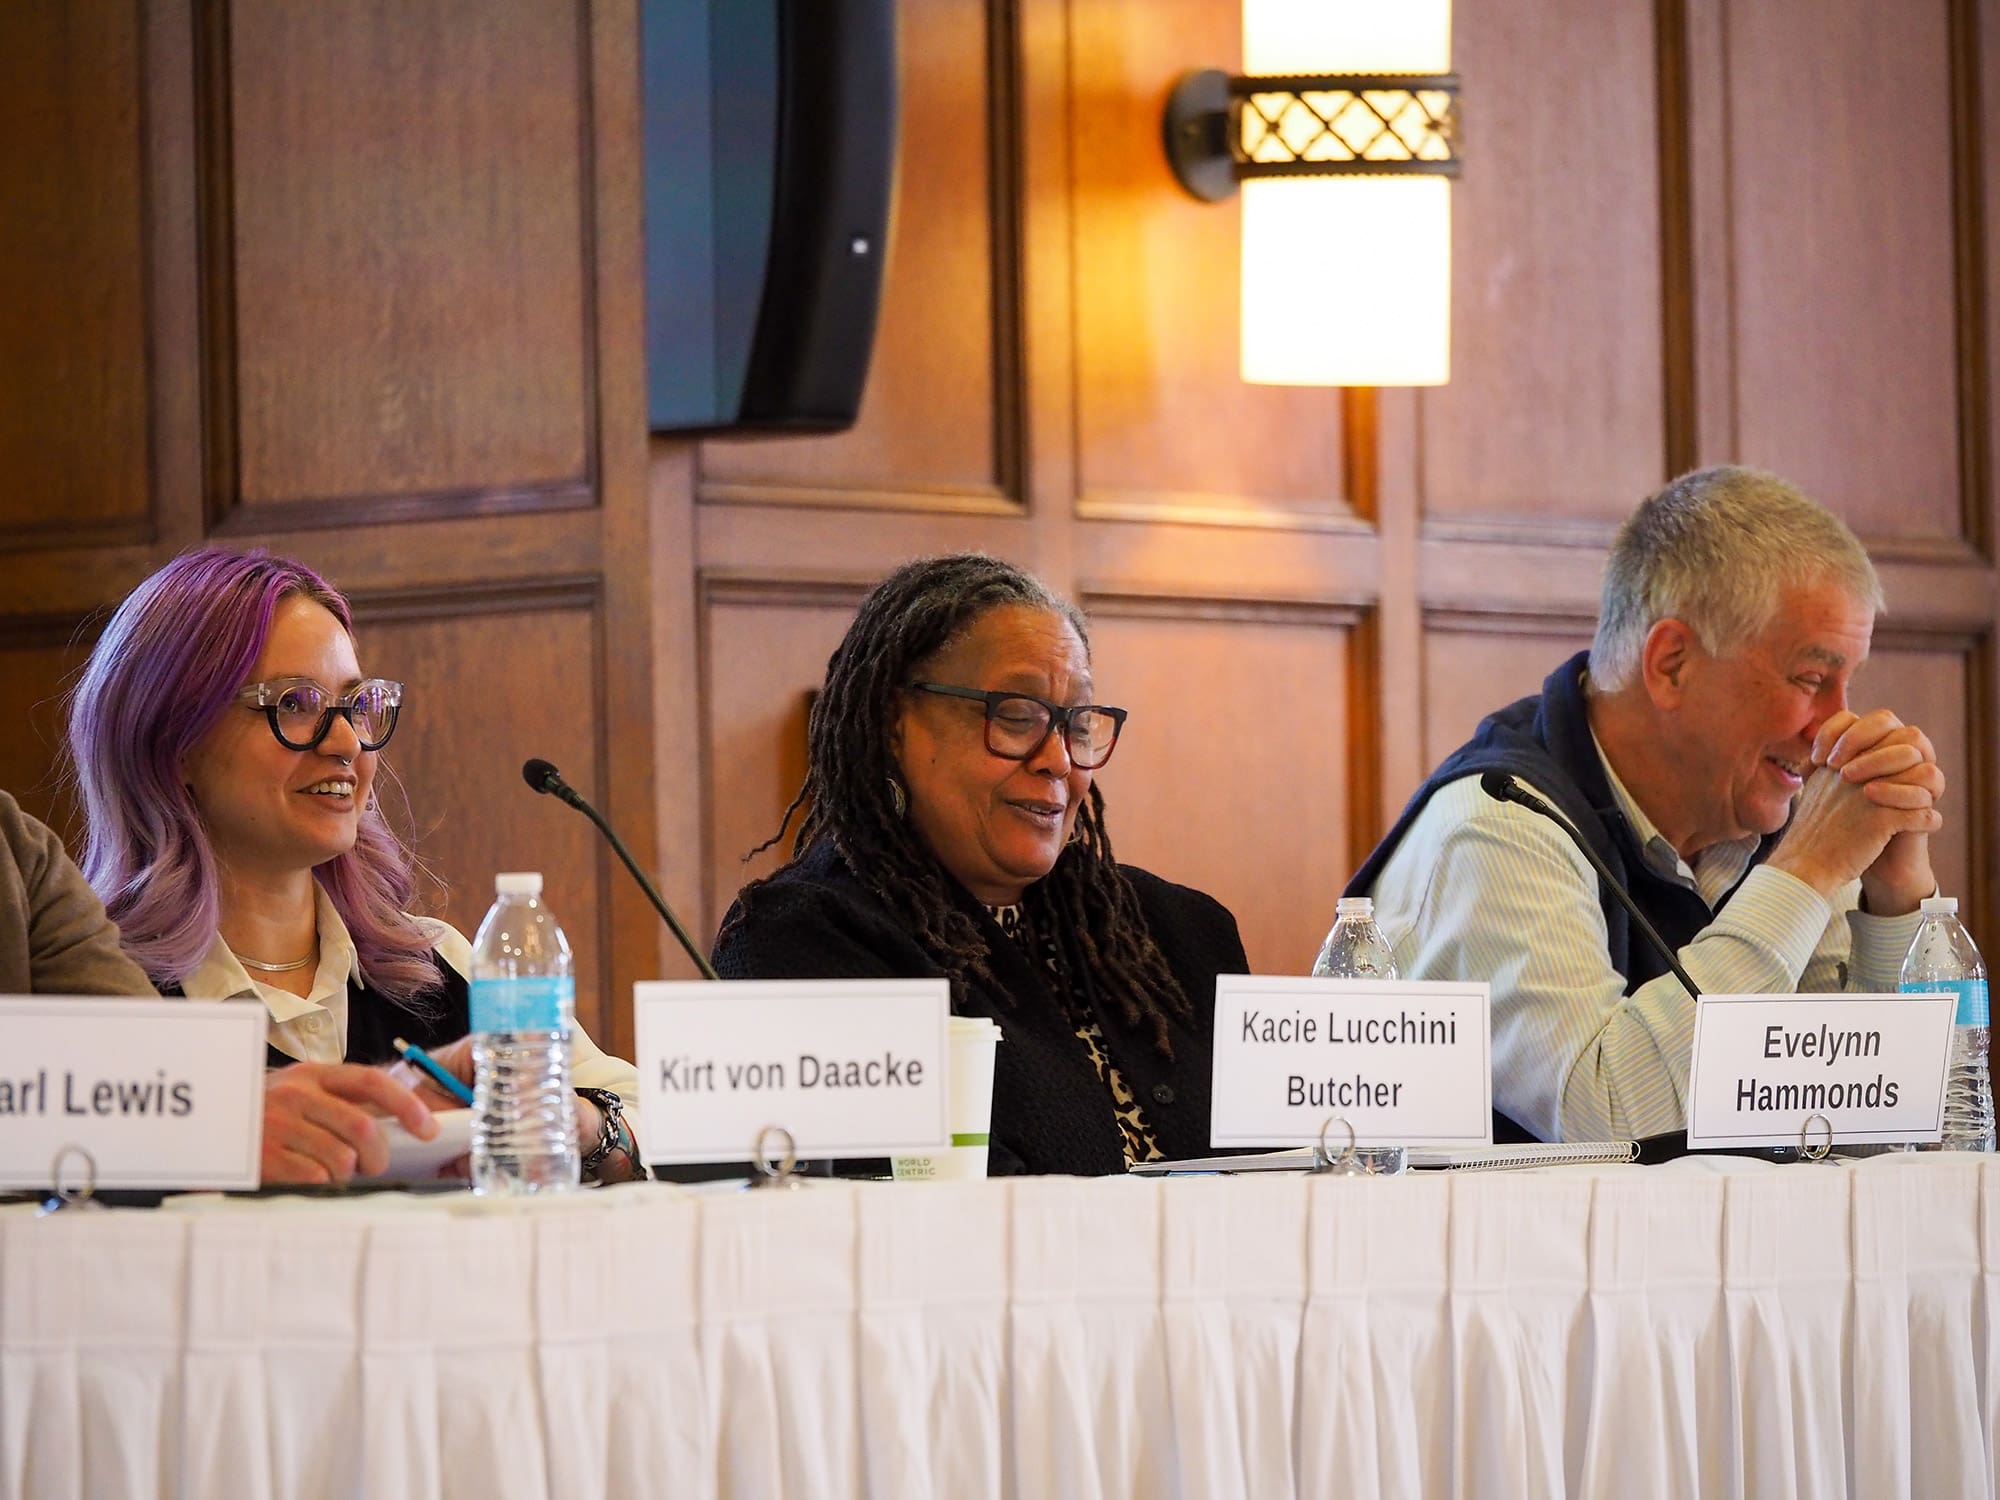 "Confronting an Institution’s Pasts" Symposium, presented by the Inclusive History Project and the Eisenberg Institute for Historical Studies on February 10, 2023. Seated (left to right) are panelists Kacie Lucchini Butcher, Evelynn Hammonds, and James Campbell.